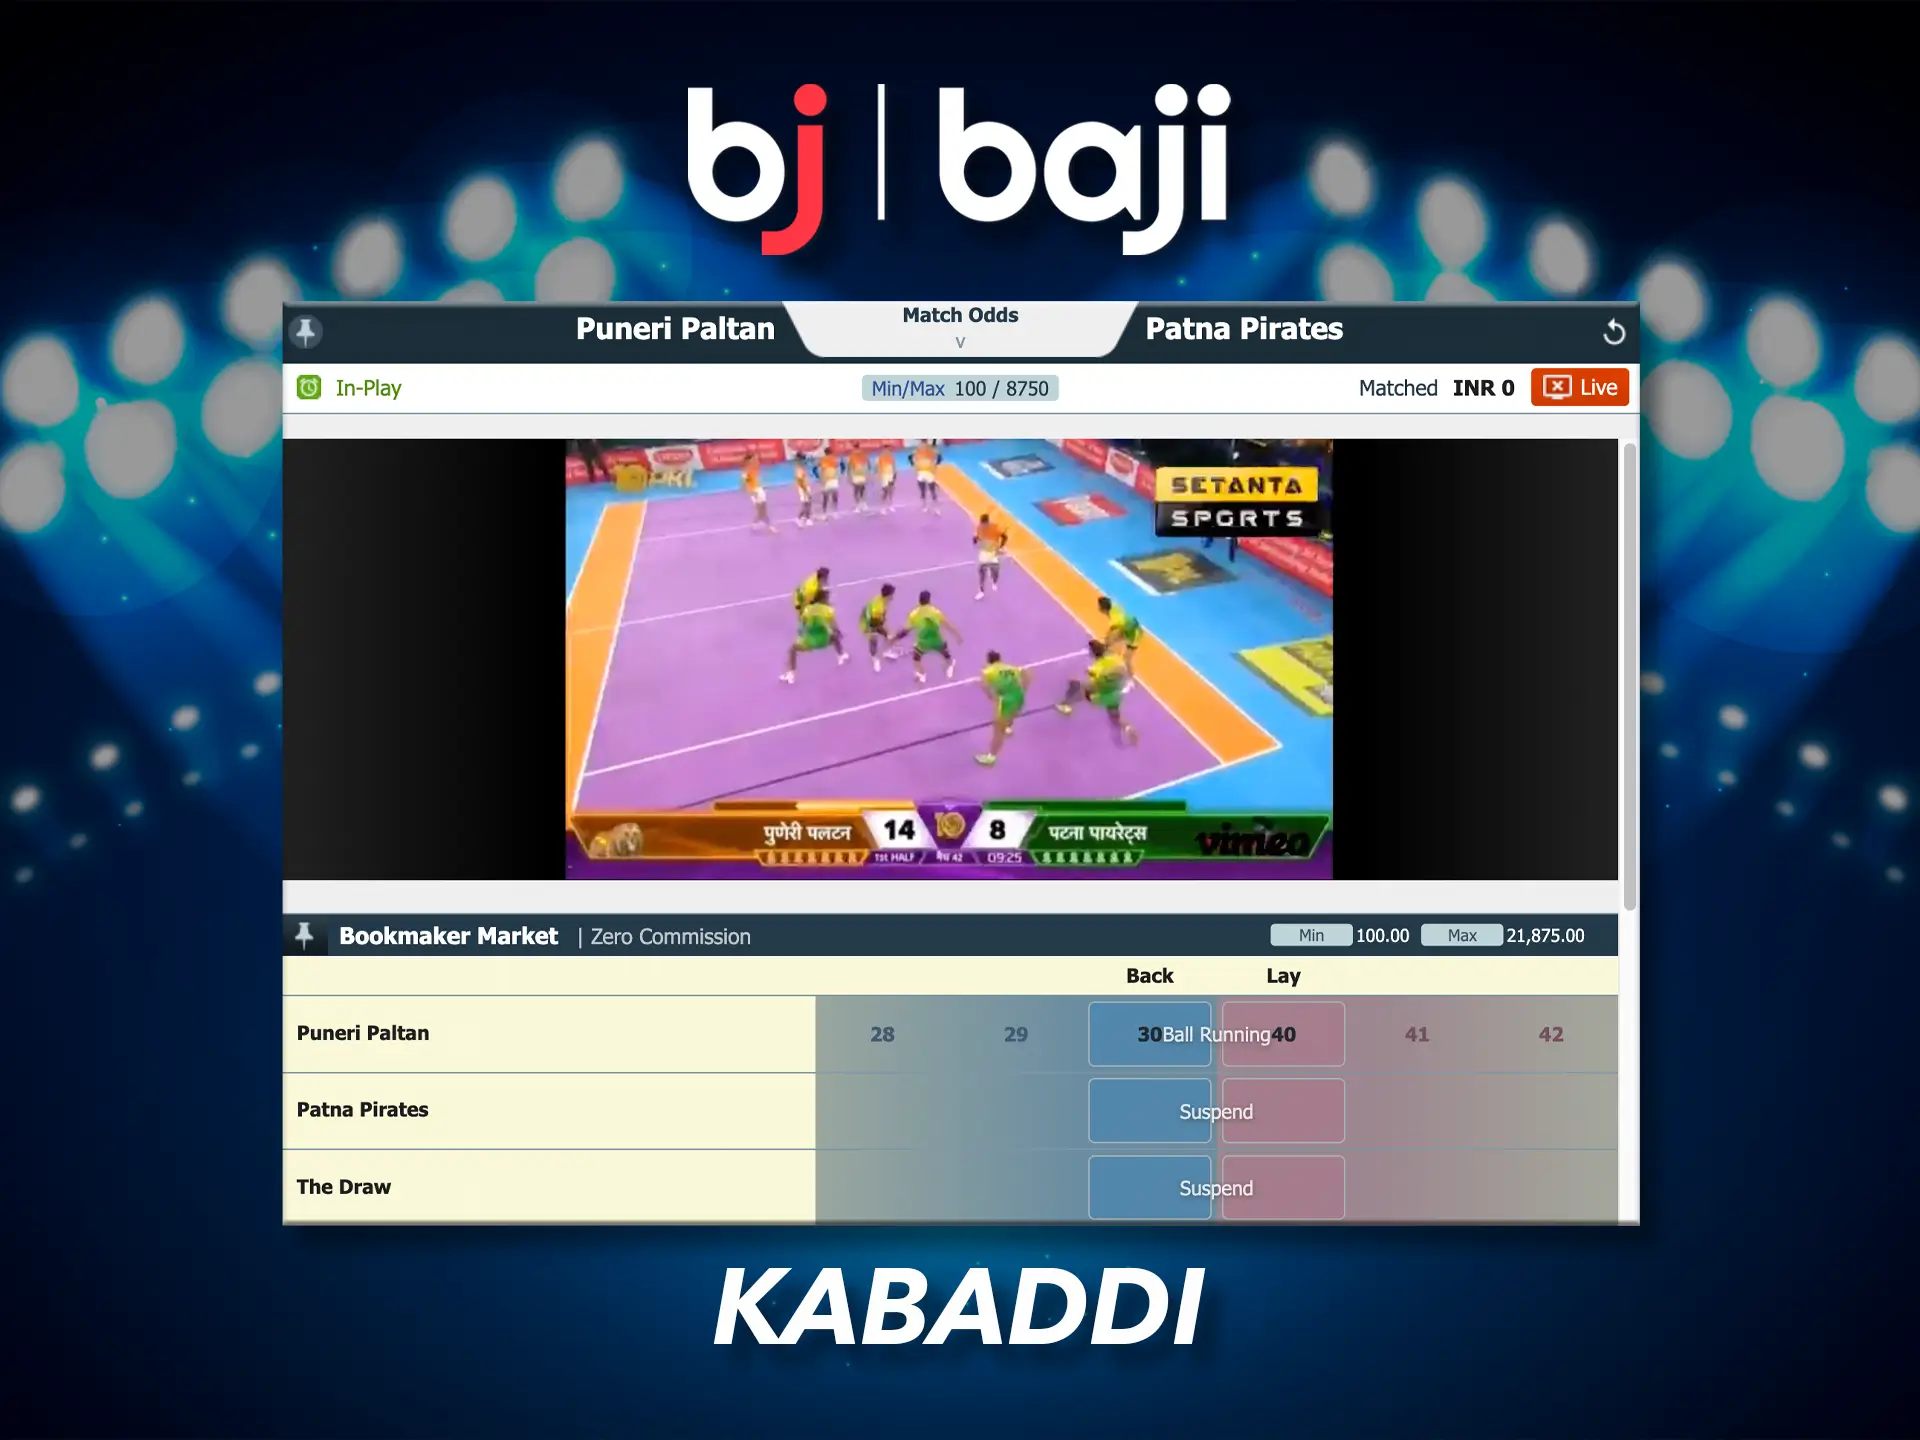 The popular sporting discipline of Kabaddi is featured at Baji Bookmaker.